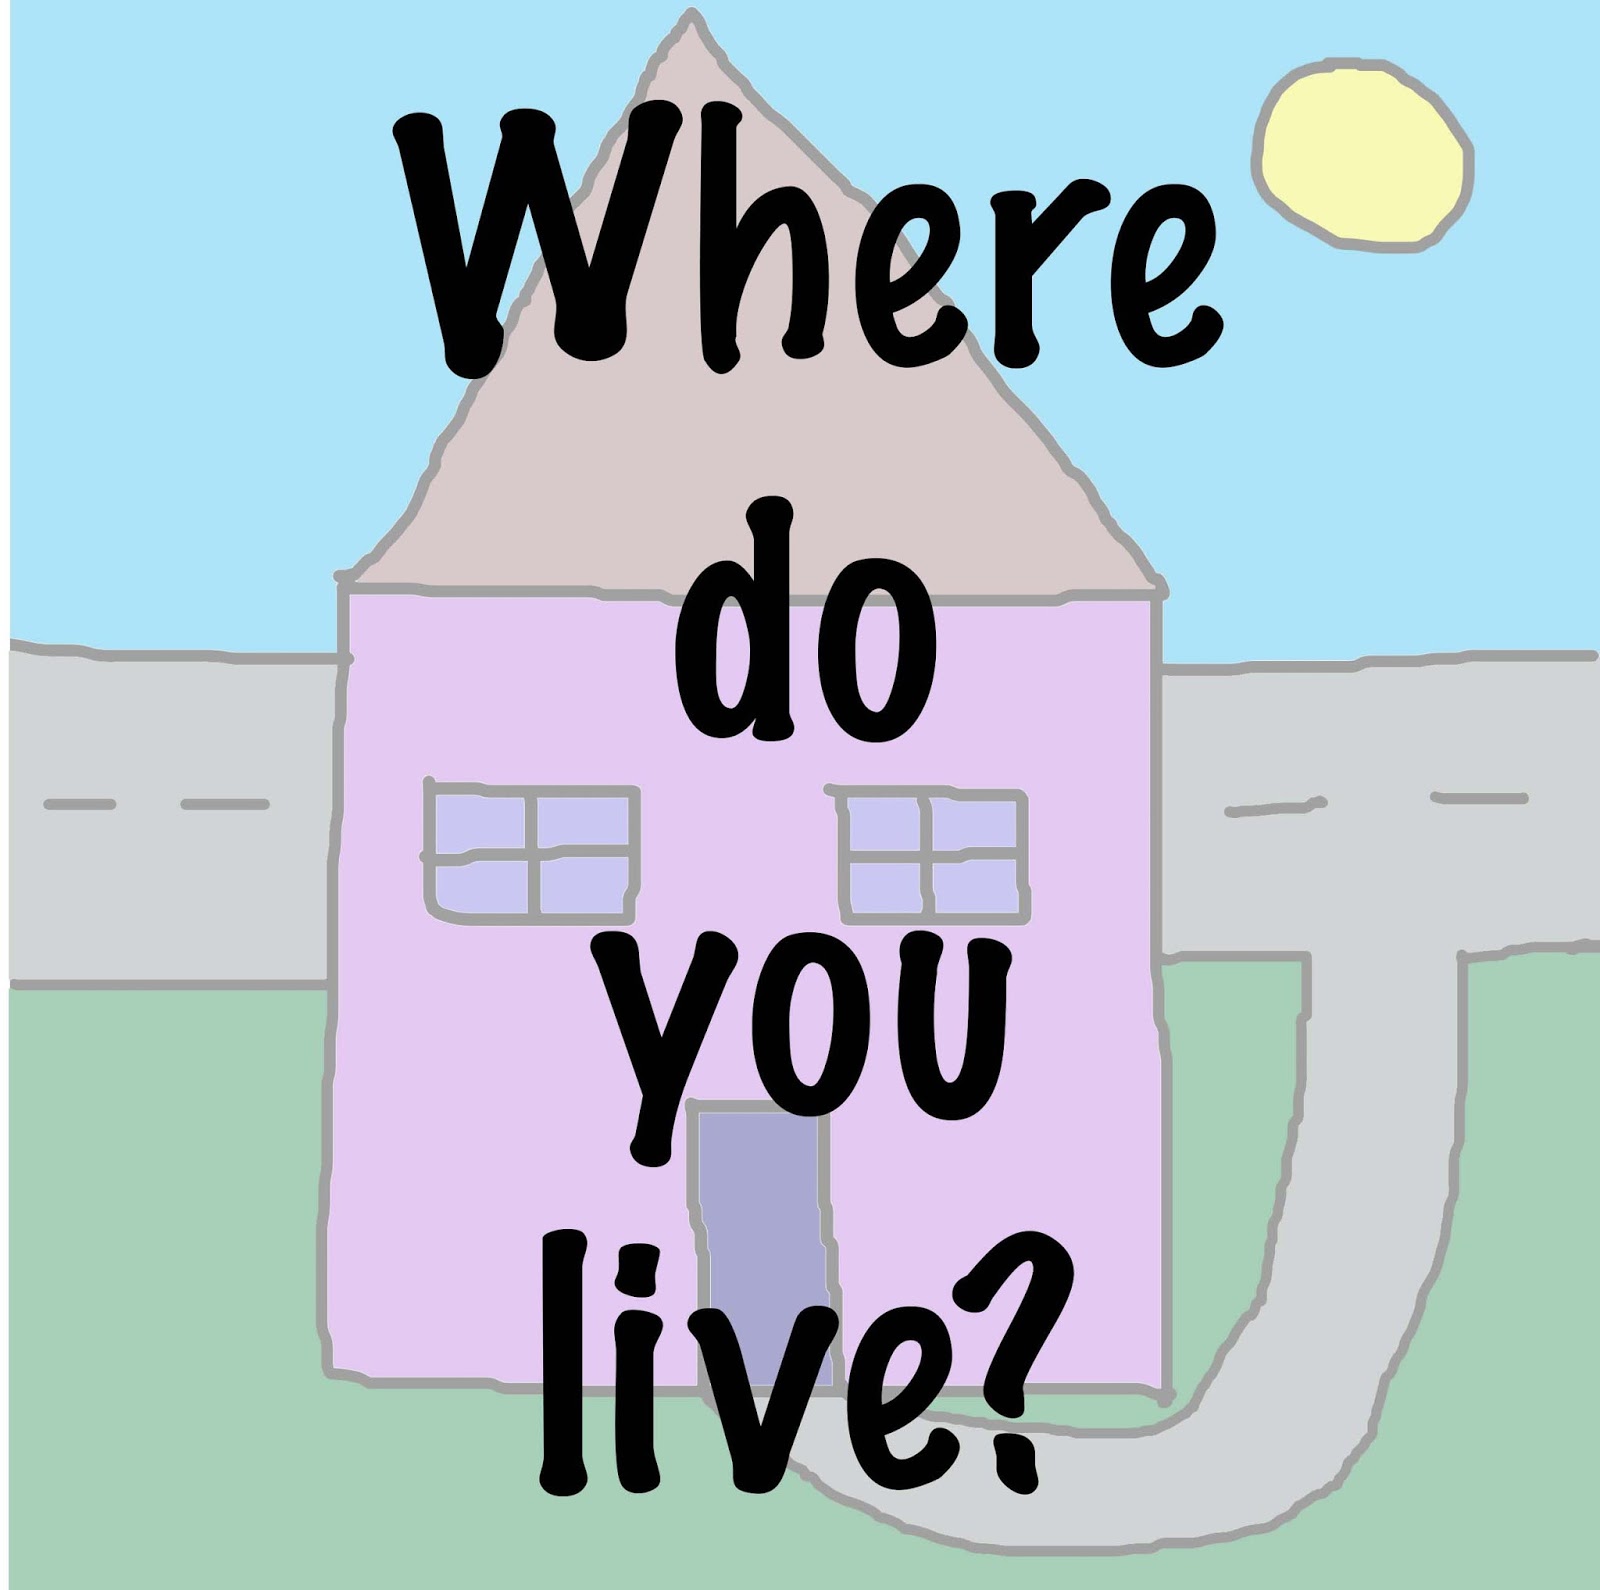 write about the place where you live